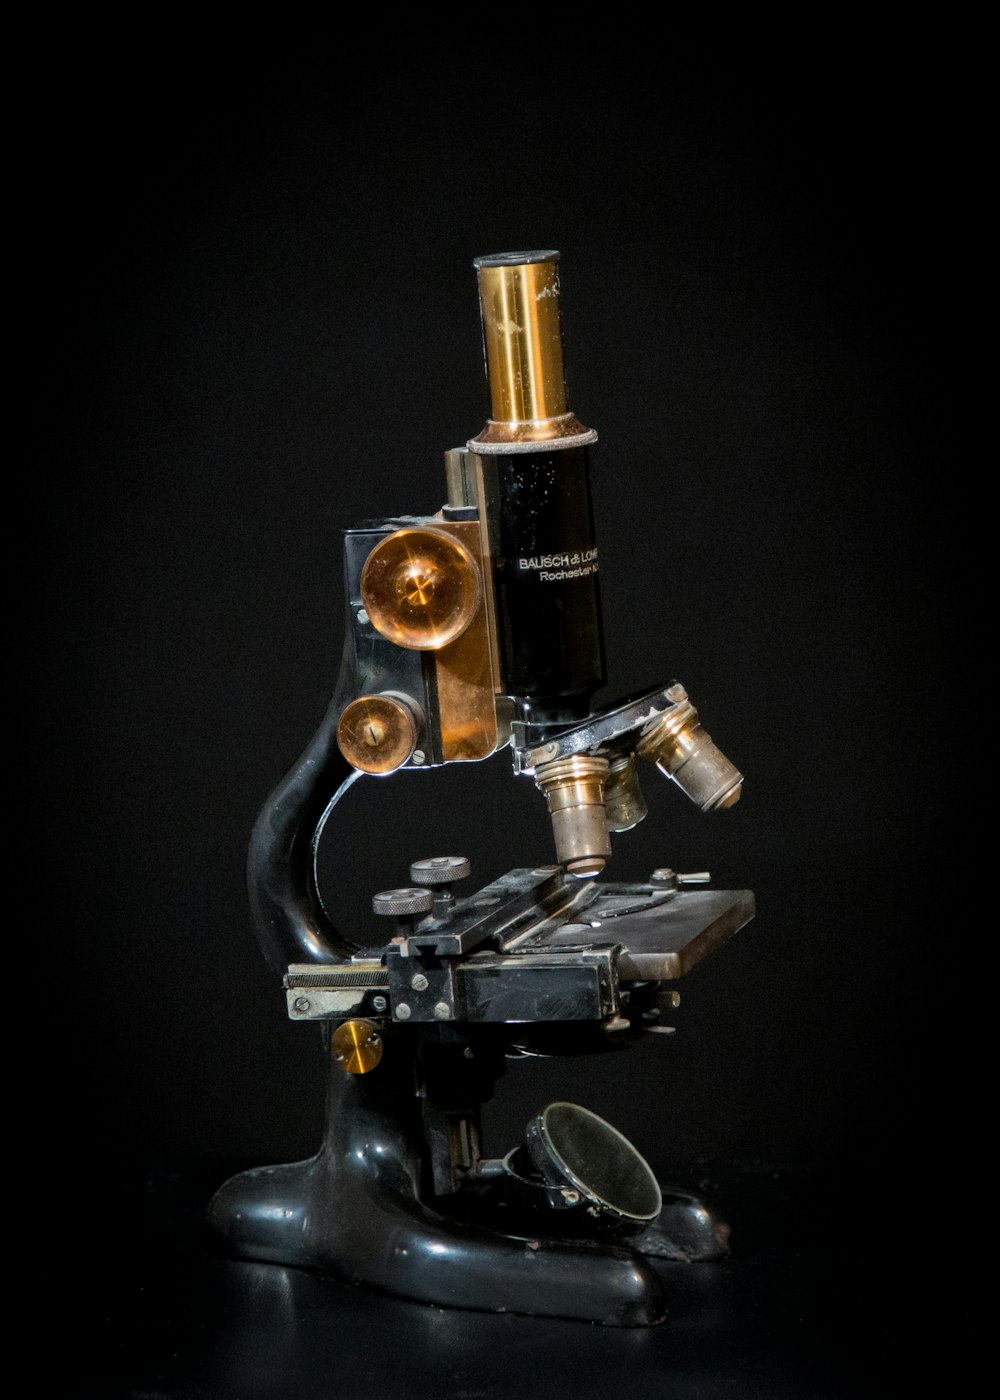 a microscope is shown with a black background